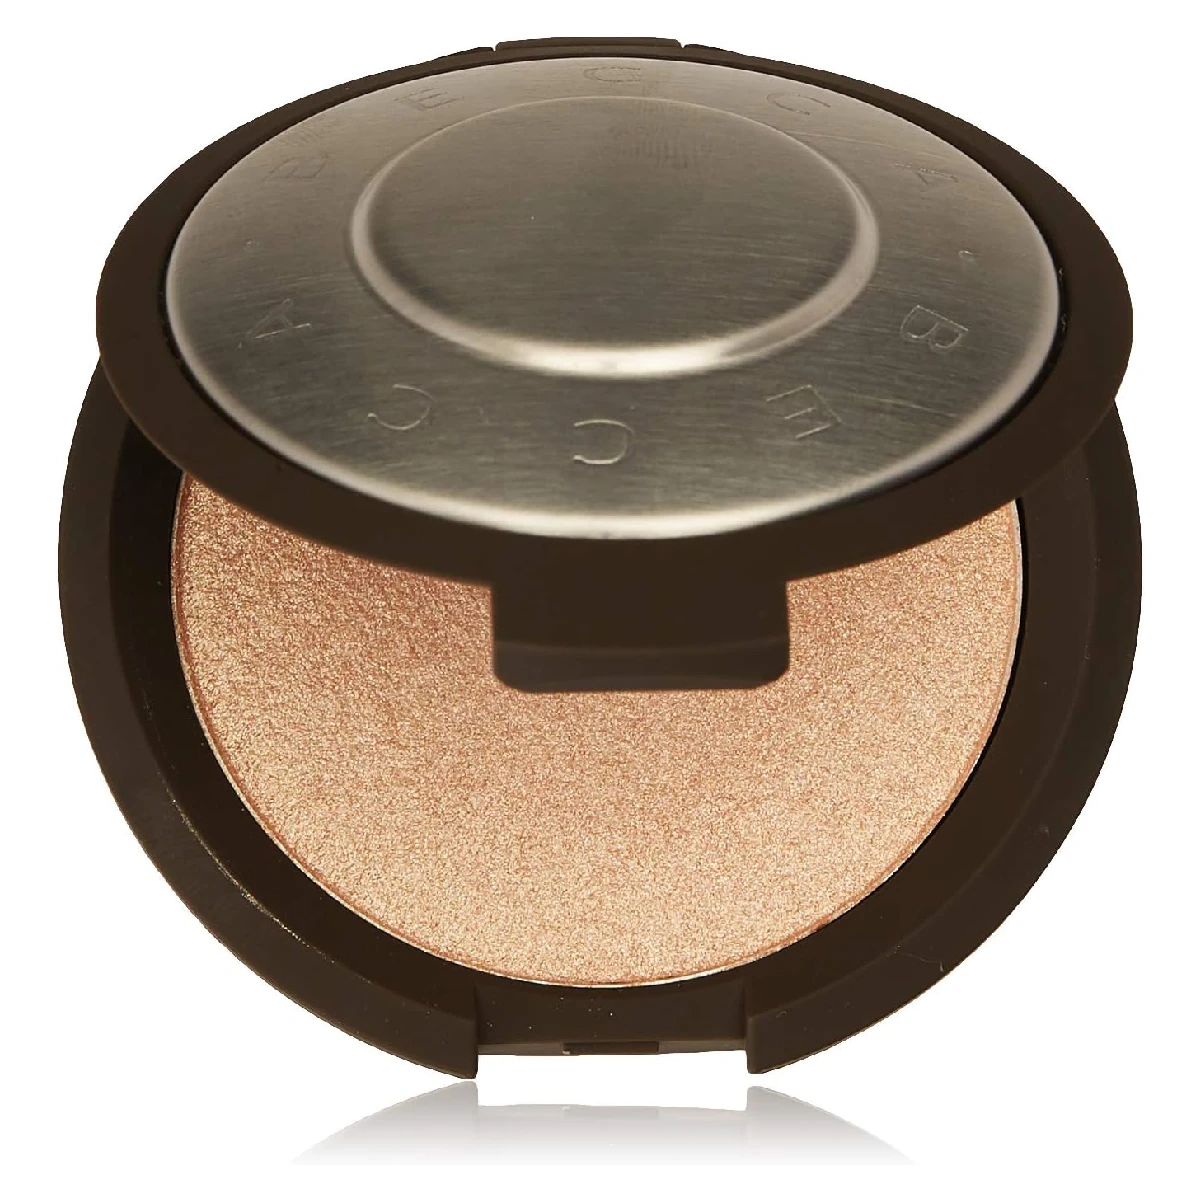 BECCA Shimmering Skin Perfector Pressed Highlighter compact open against a white background, showing the shimmering powder.